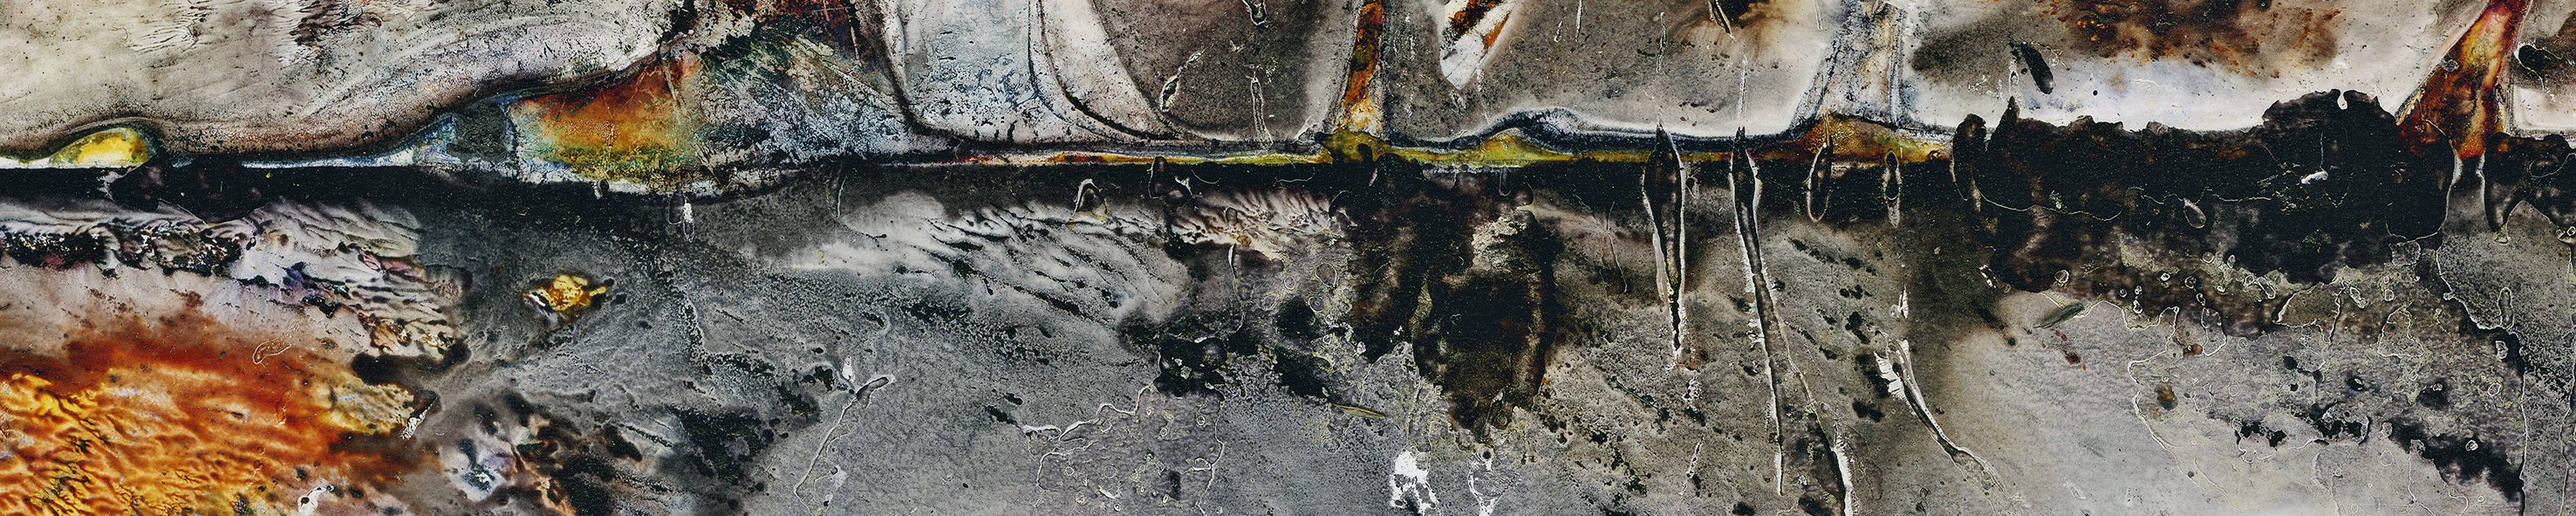 Renata Buziak,'Tales of the Puddle', 2009, archival pigment on HahnemuhleTorchon paper. Image courtesy of the ANCA Gallery